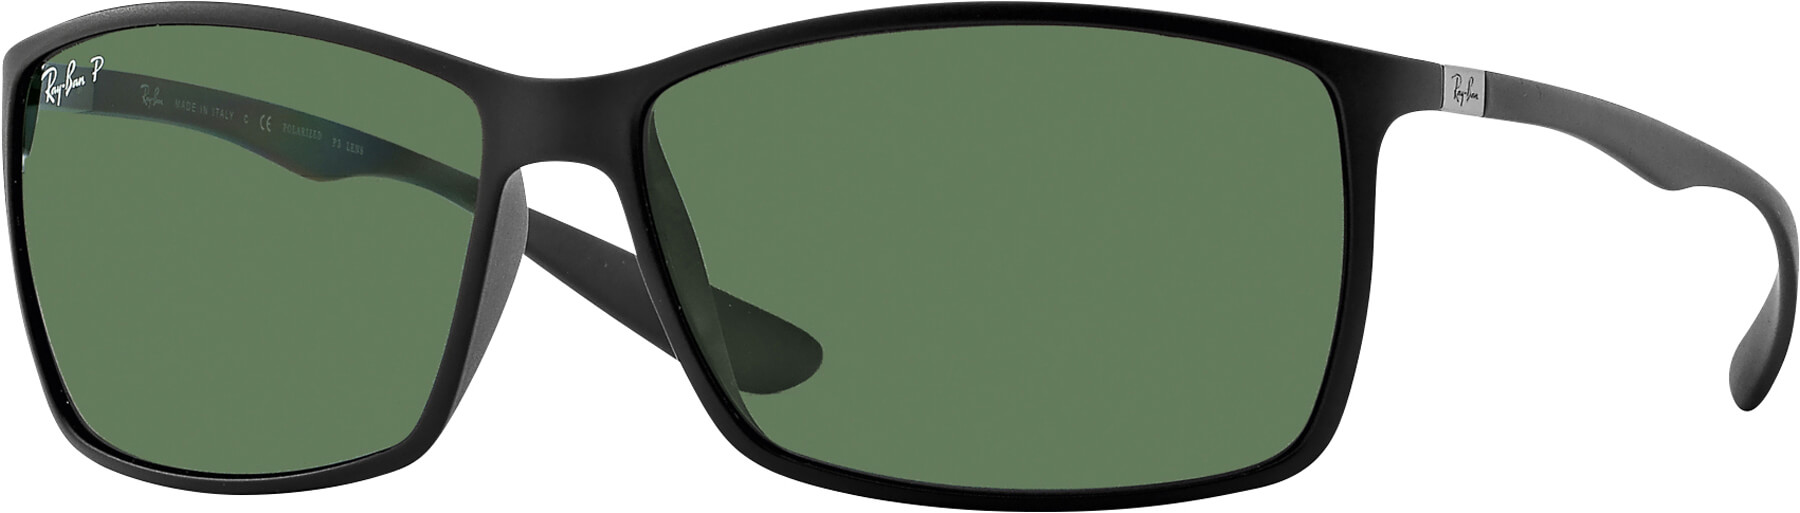 Ray-Ban LITEFORCE 4179 image number null